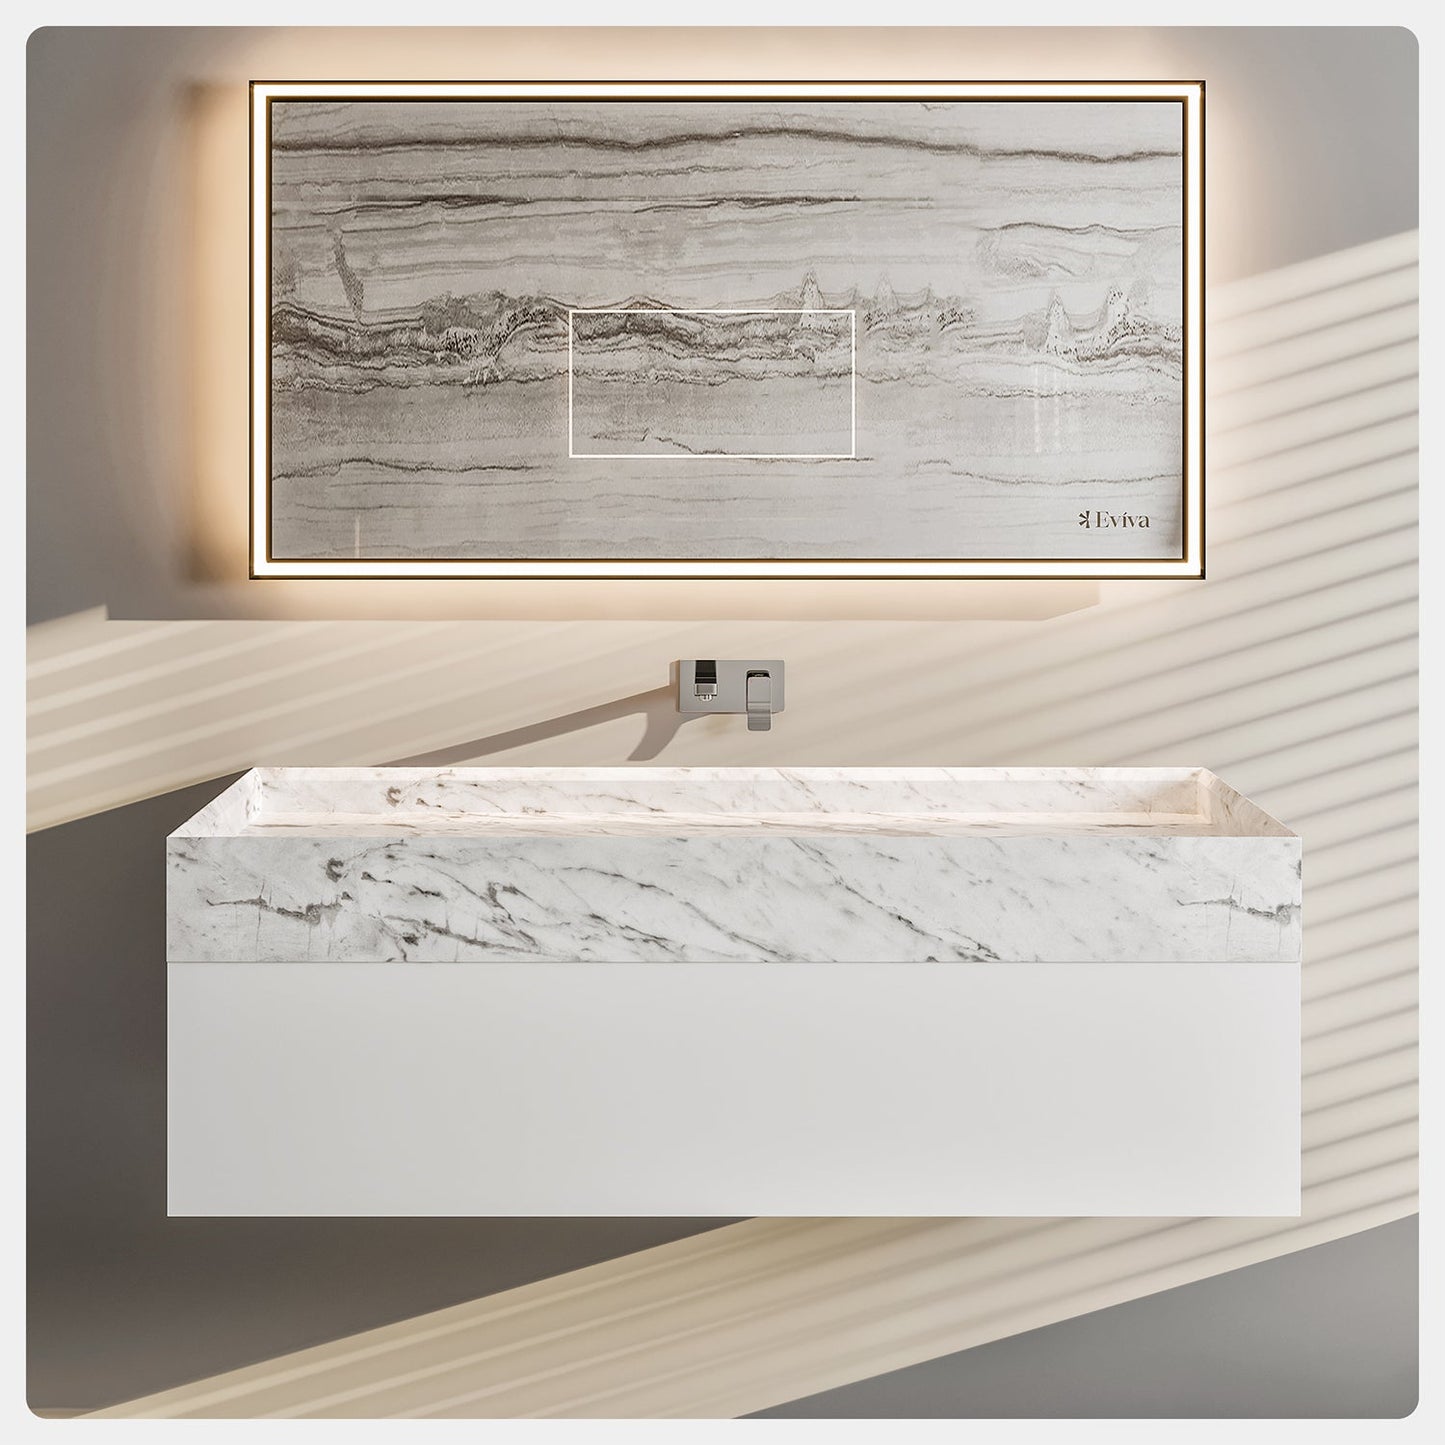 EVIVA Fritti 48 Inch White Wall Mount Bathroom Vanity with Marble Basin